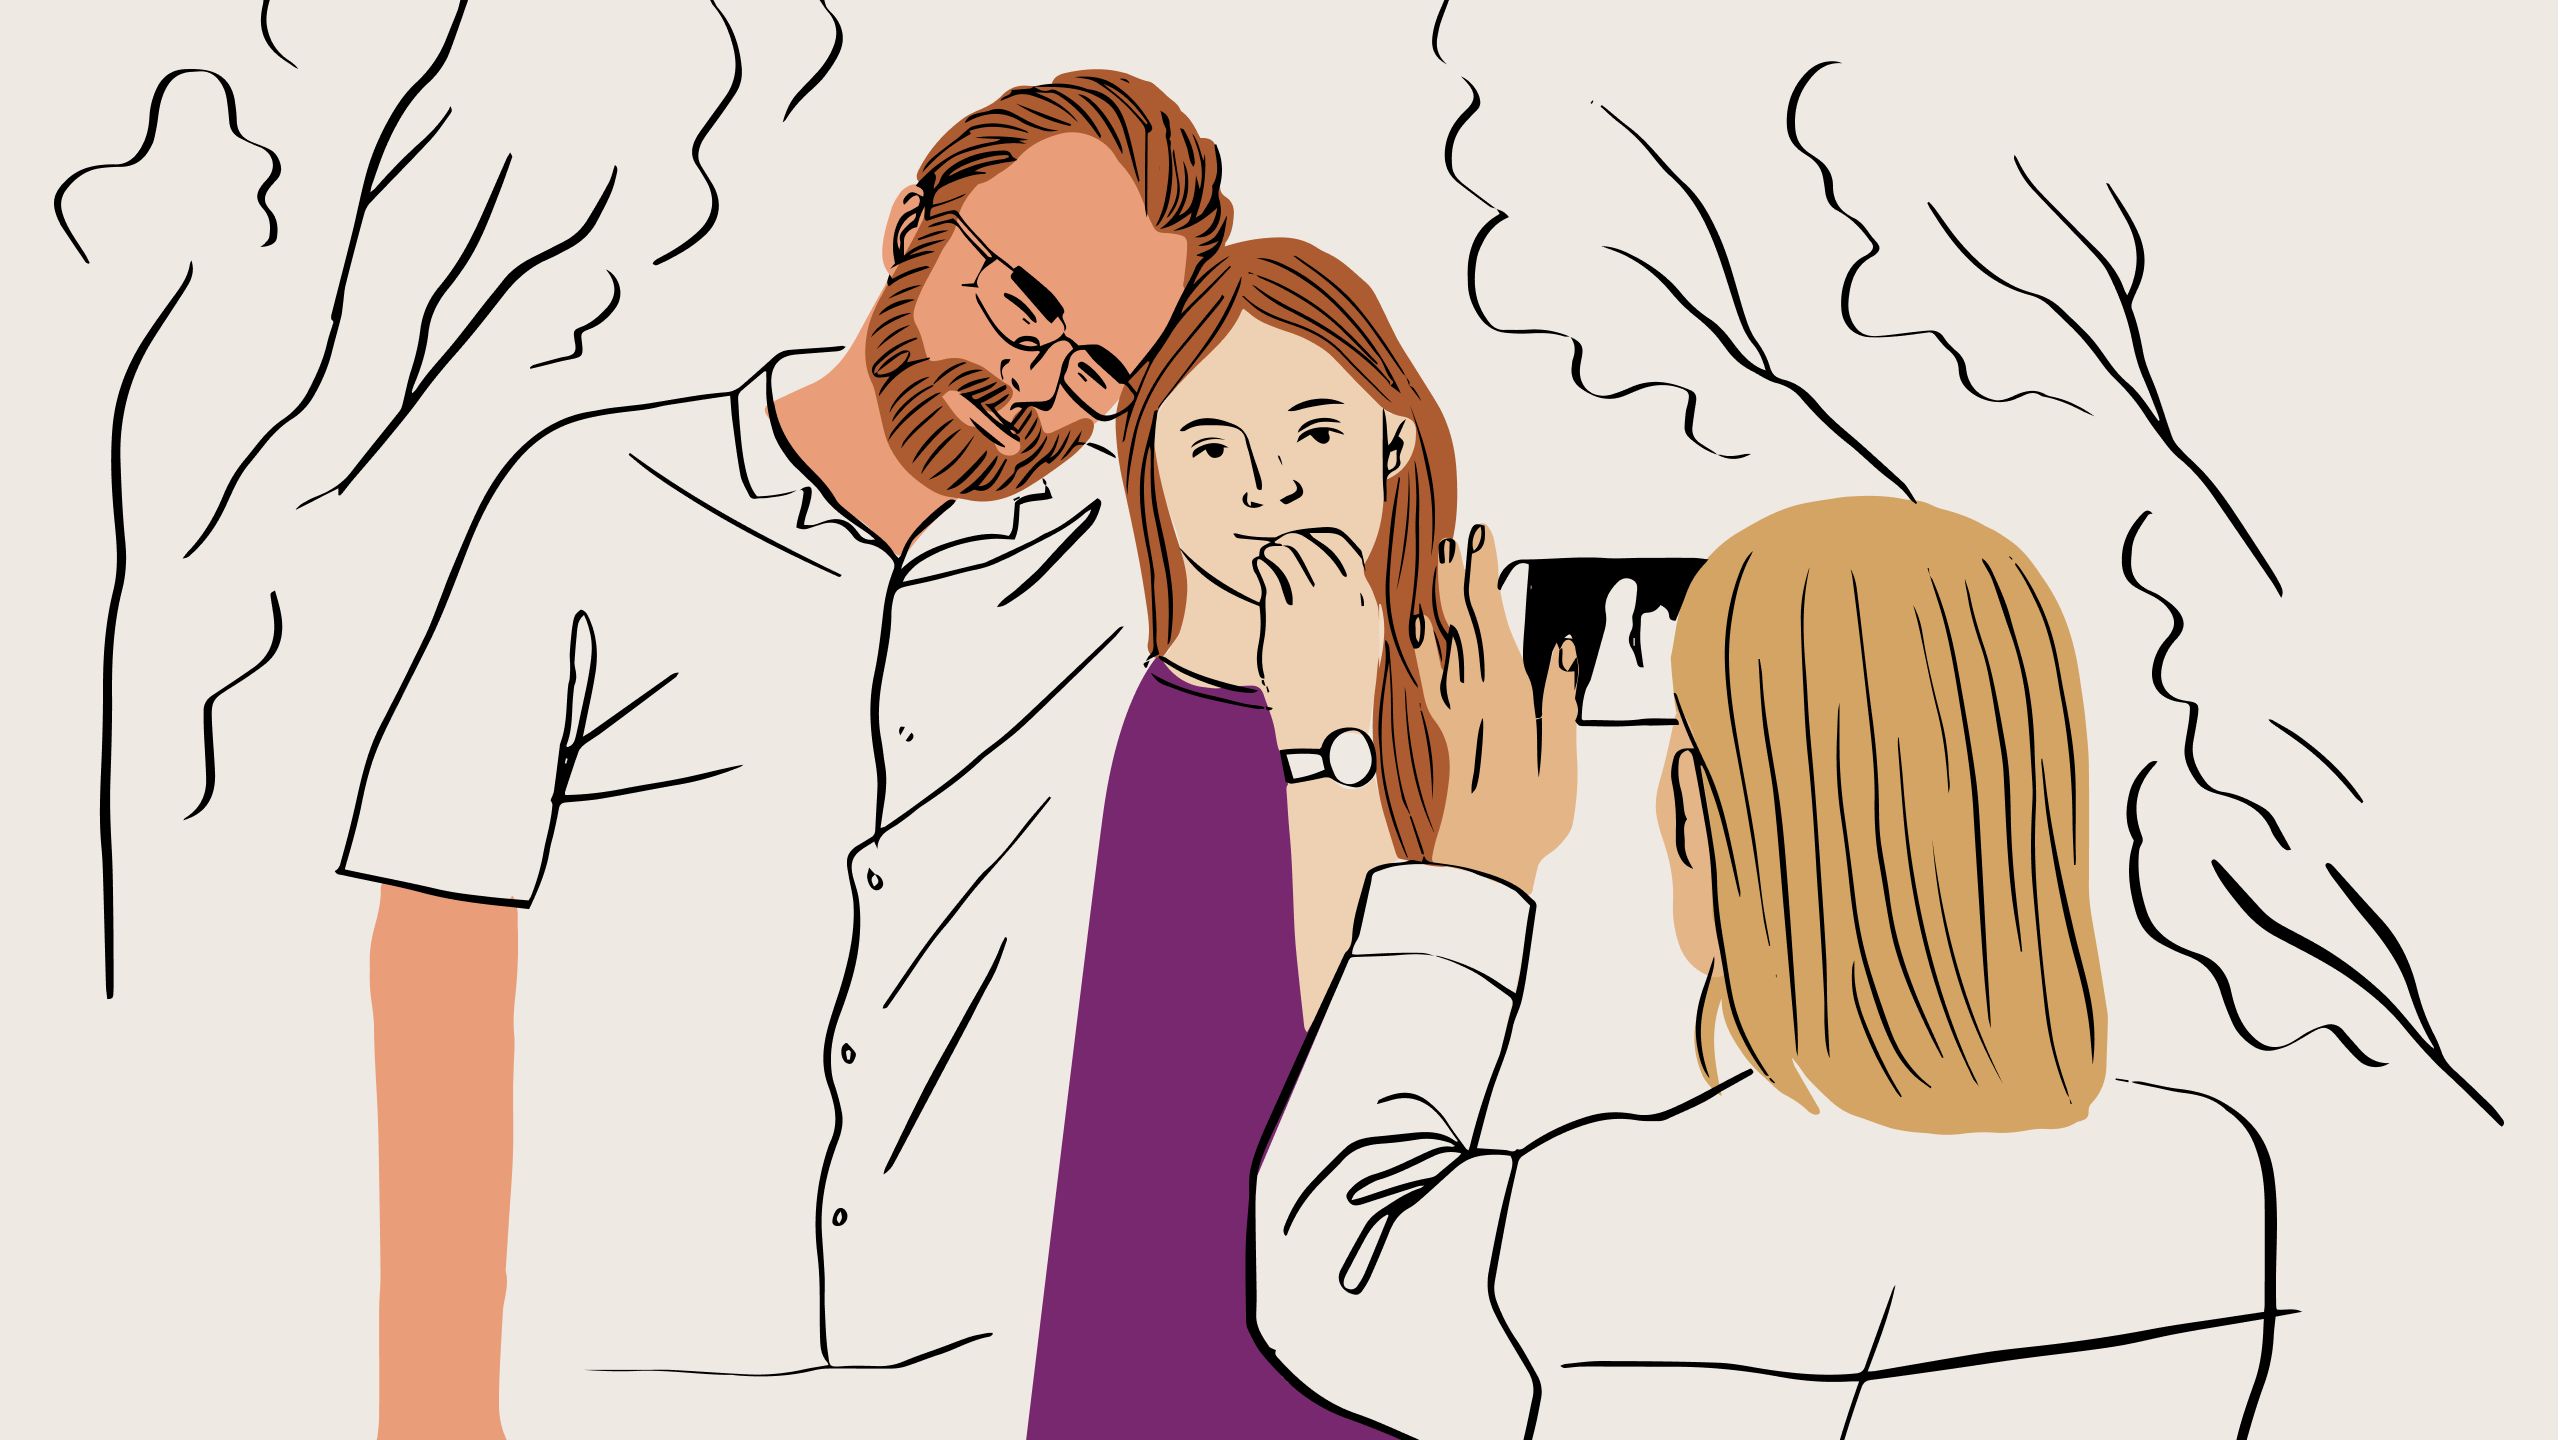 An illustration of a person taking a photo of a couple using a mobile phone